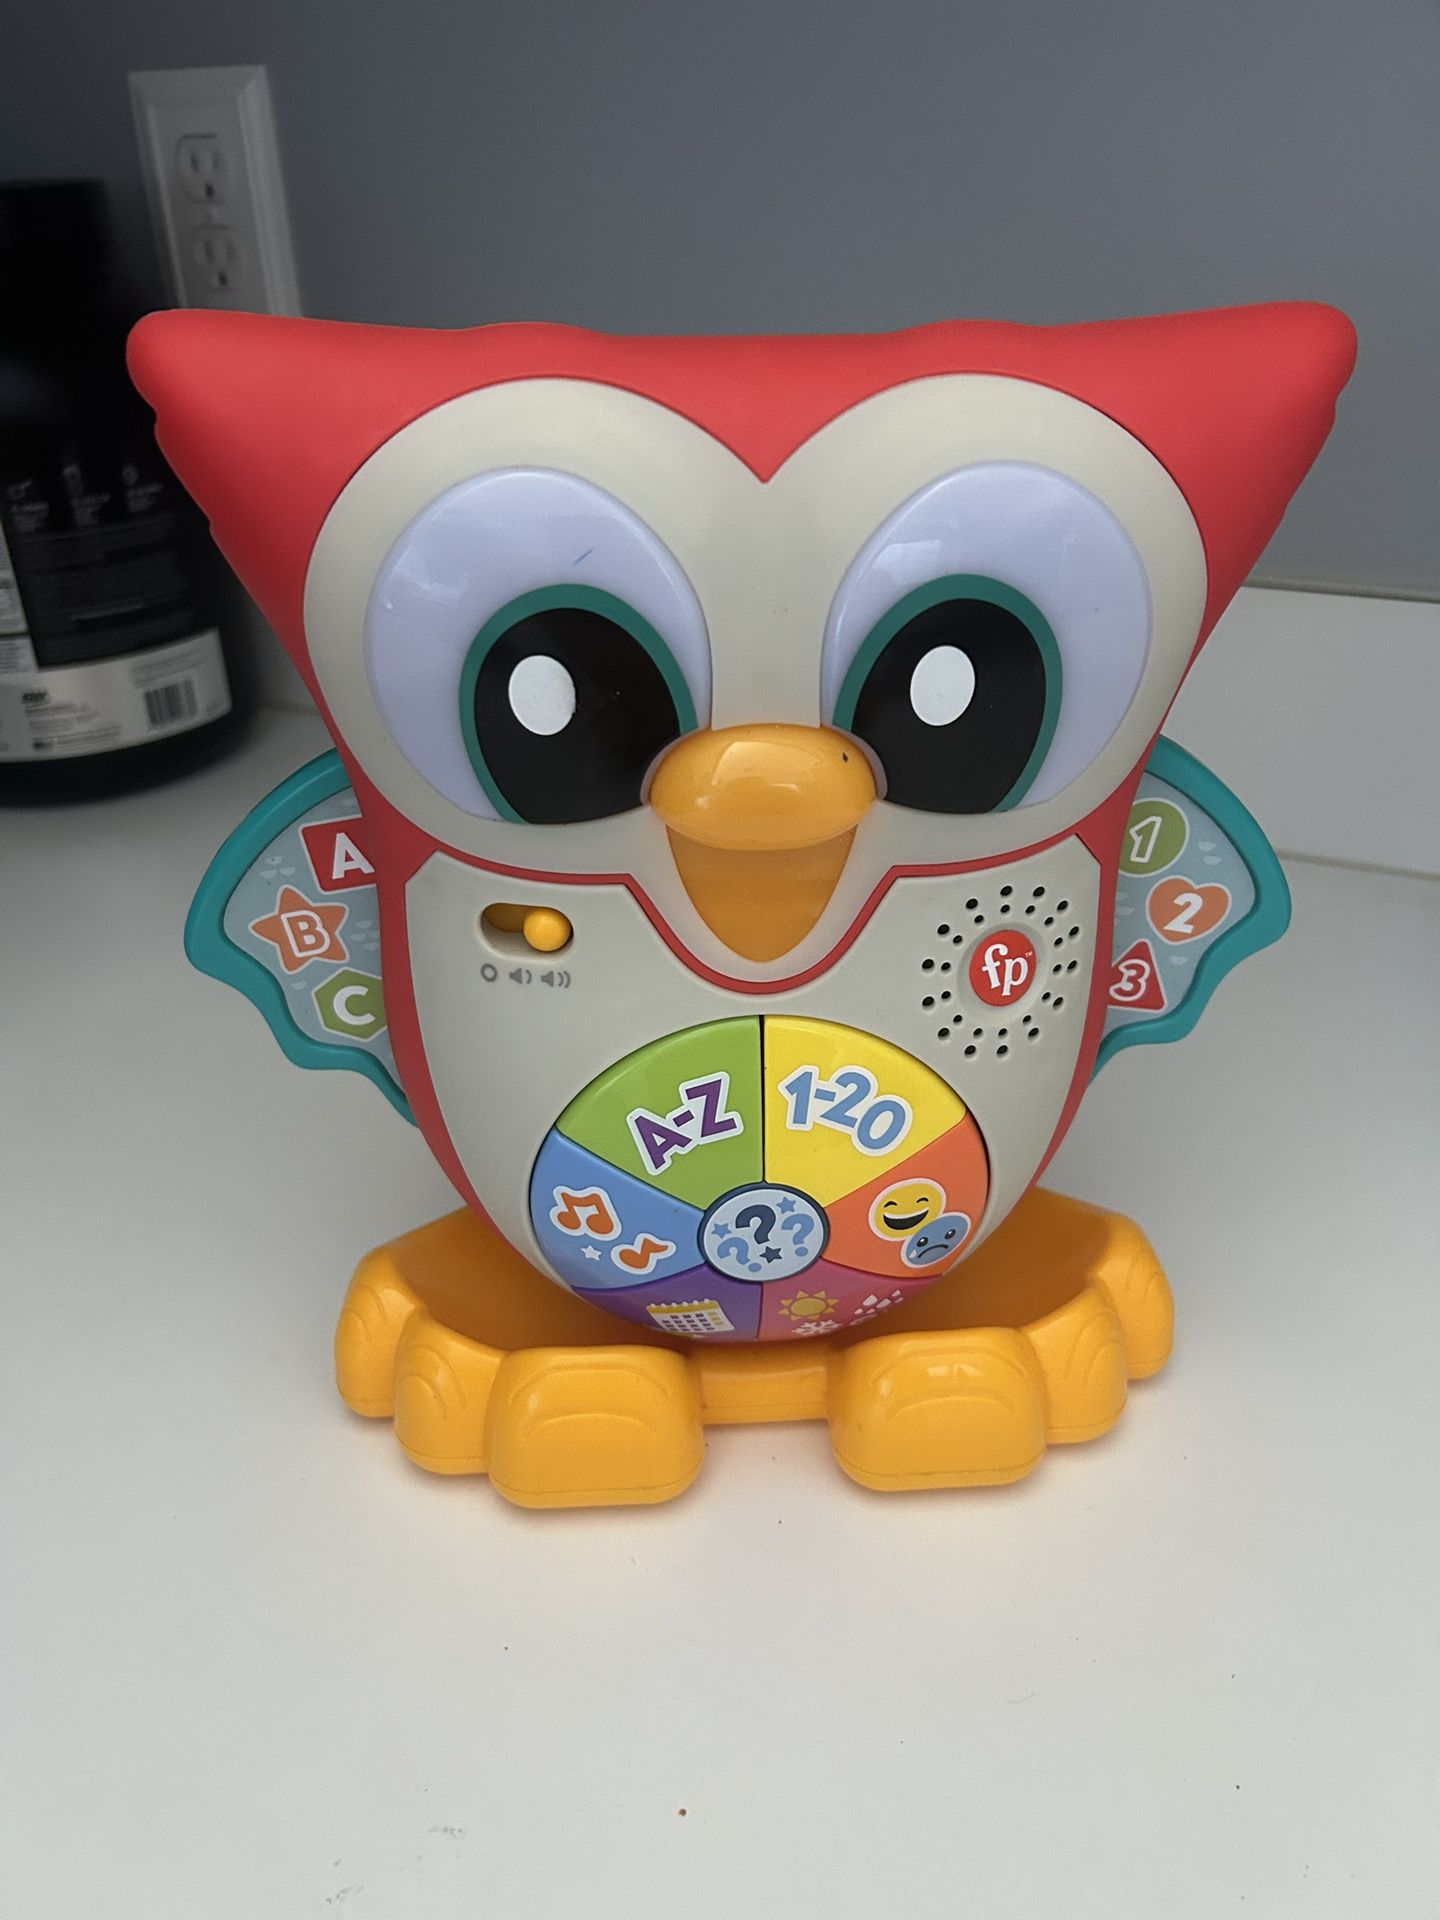 Fisher-Price Linkimals Light-Up & Learn Owl, English Version, Interactive Musical Learning Toy with Lights and Motion for Toddlers Ages 18 Months and 